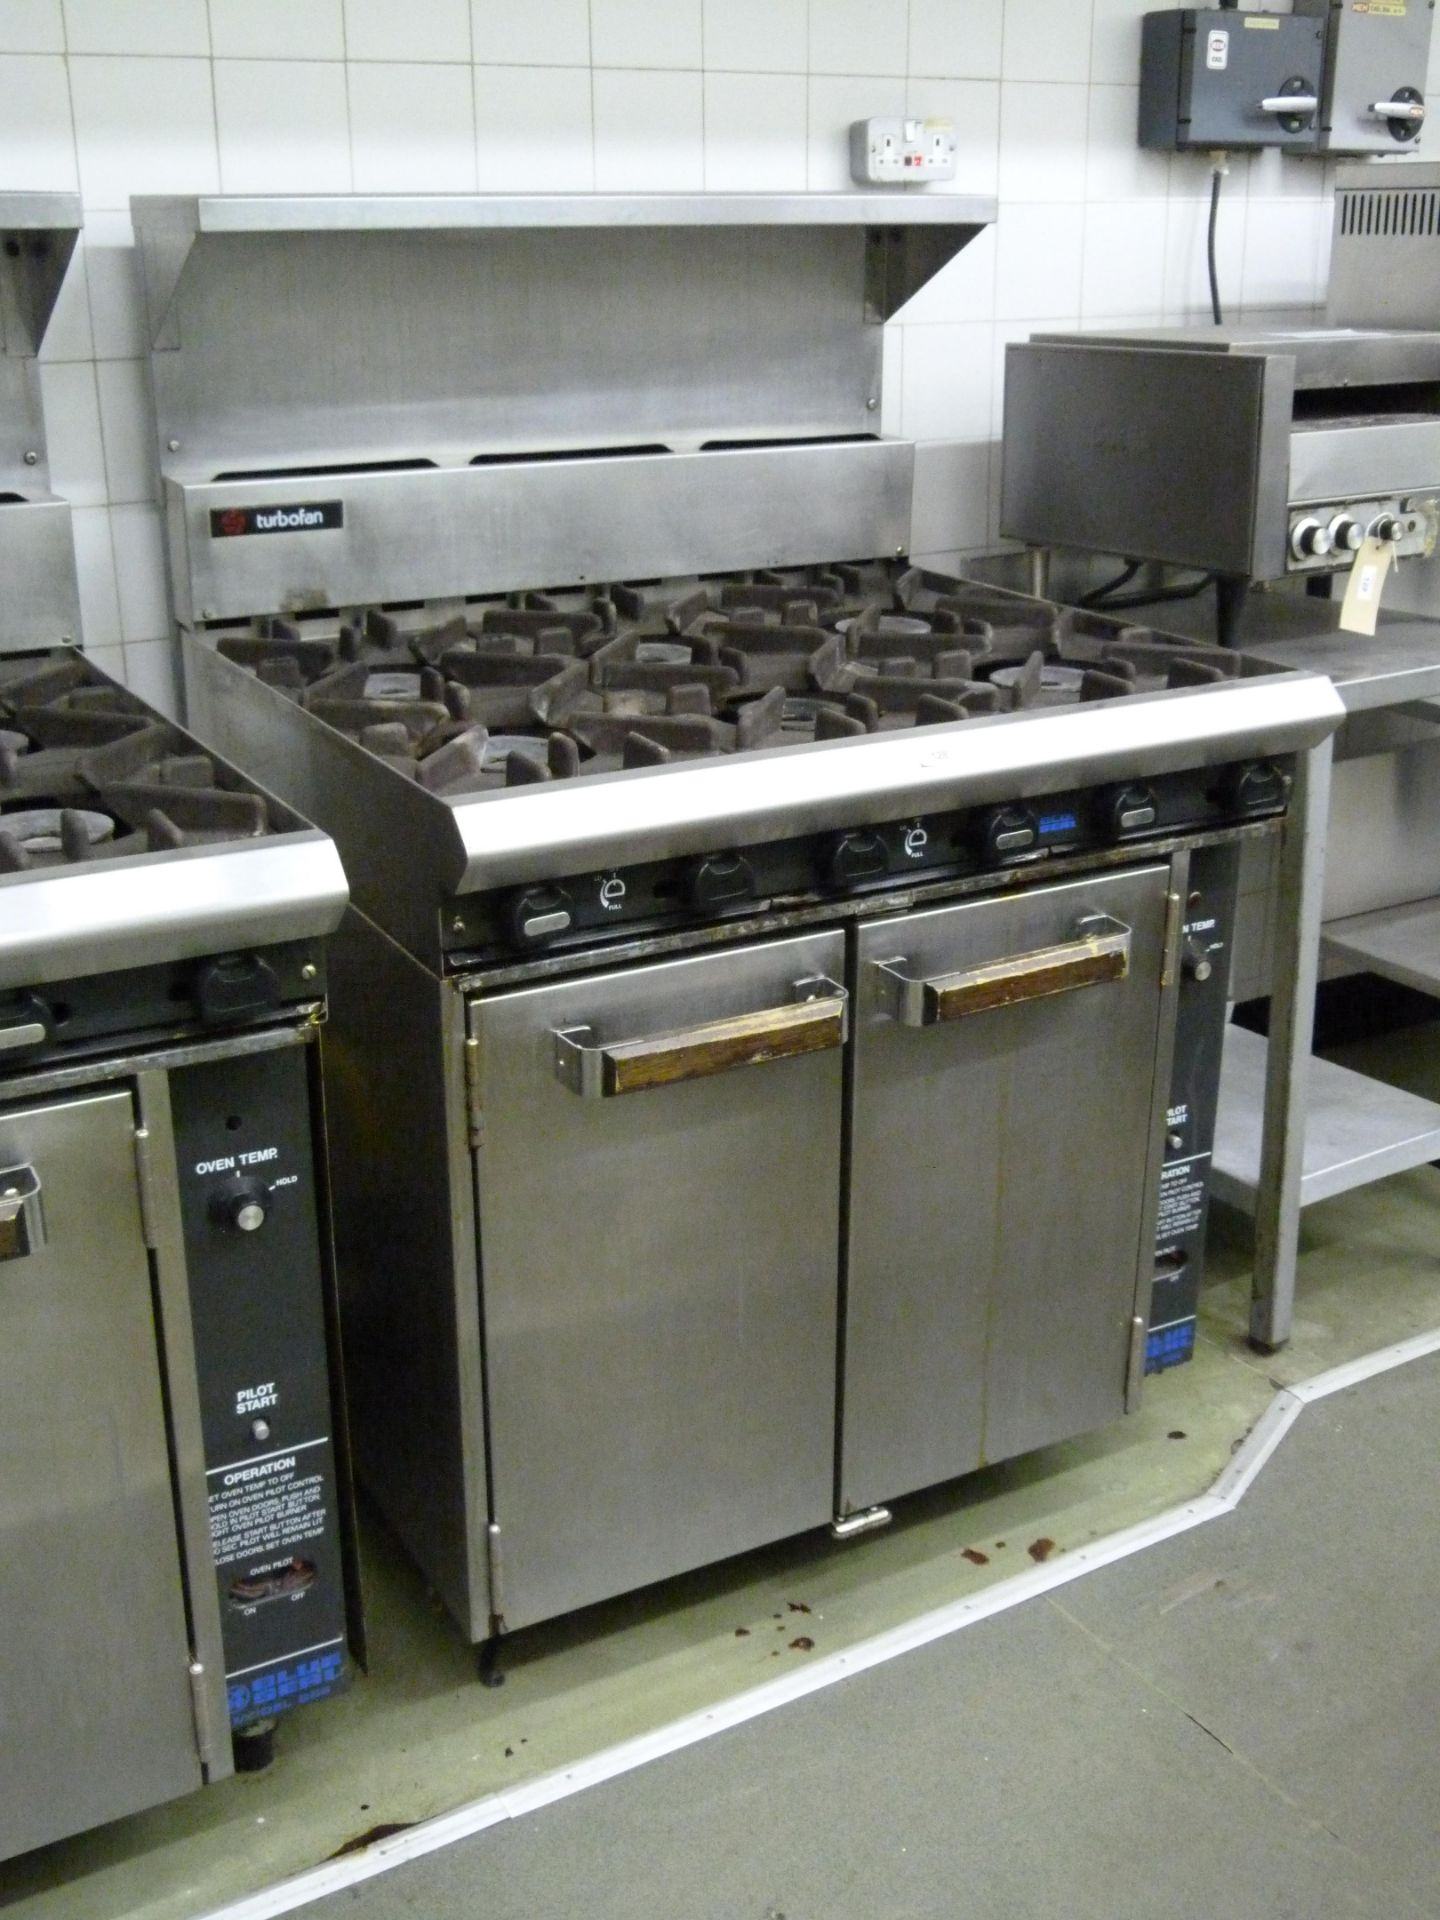 A Blue seal model 656 6 ring gas cooker with gas oven